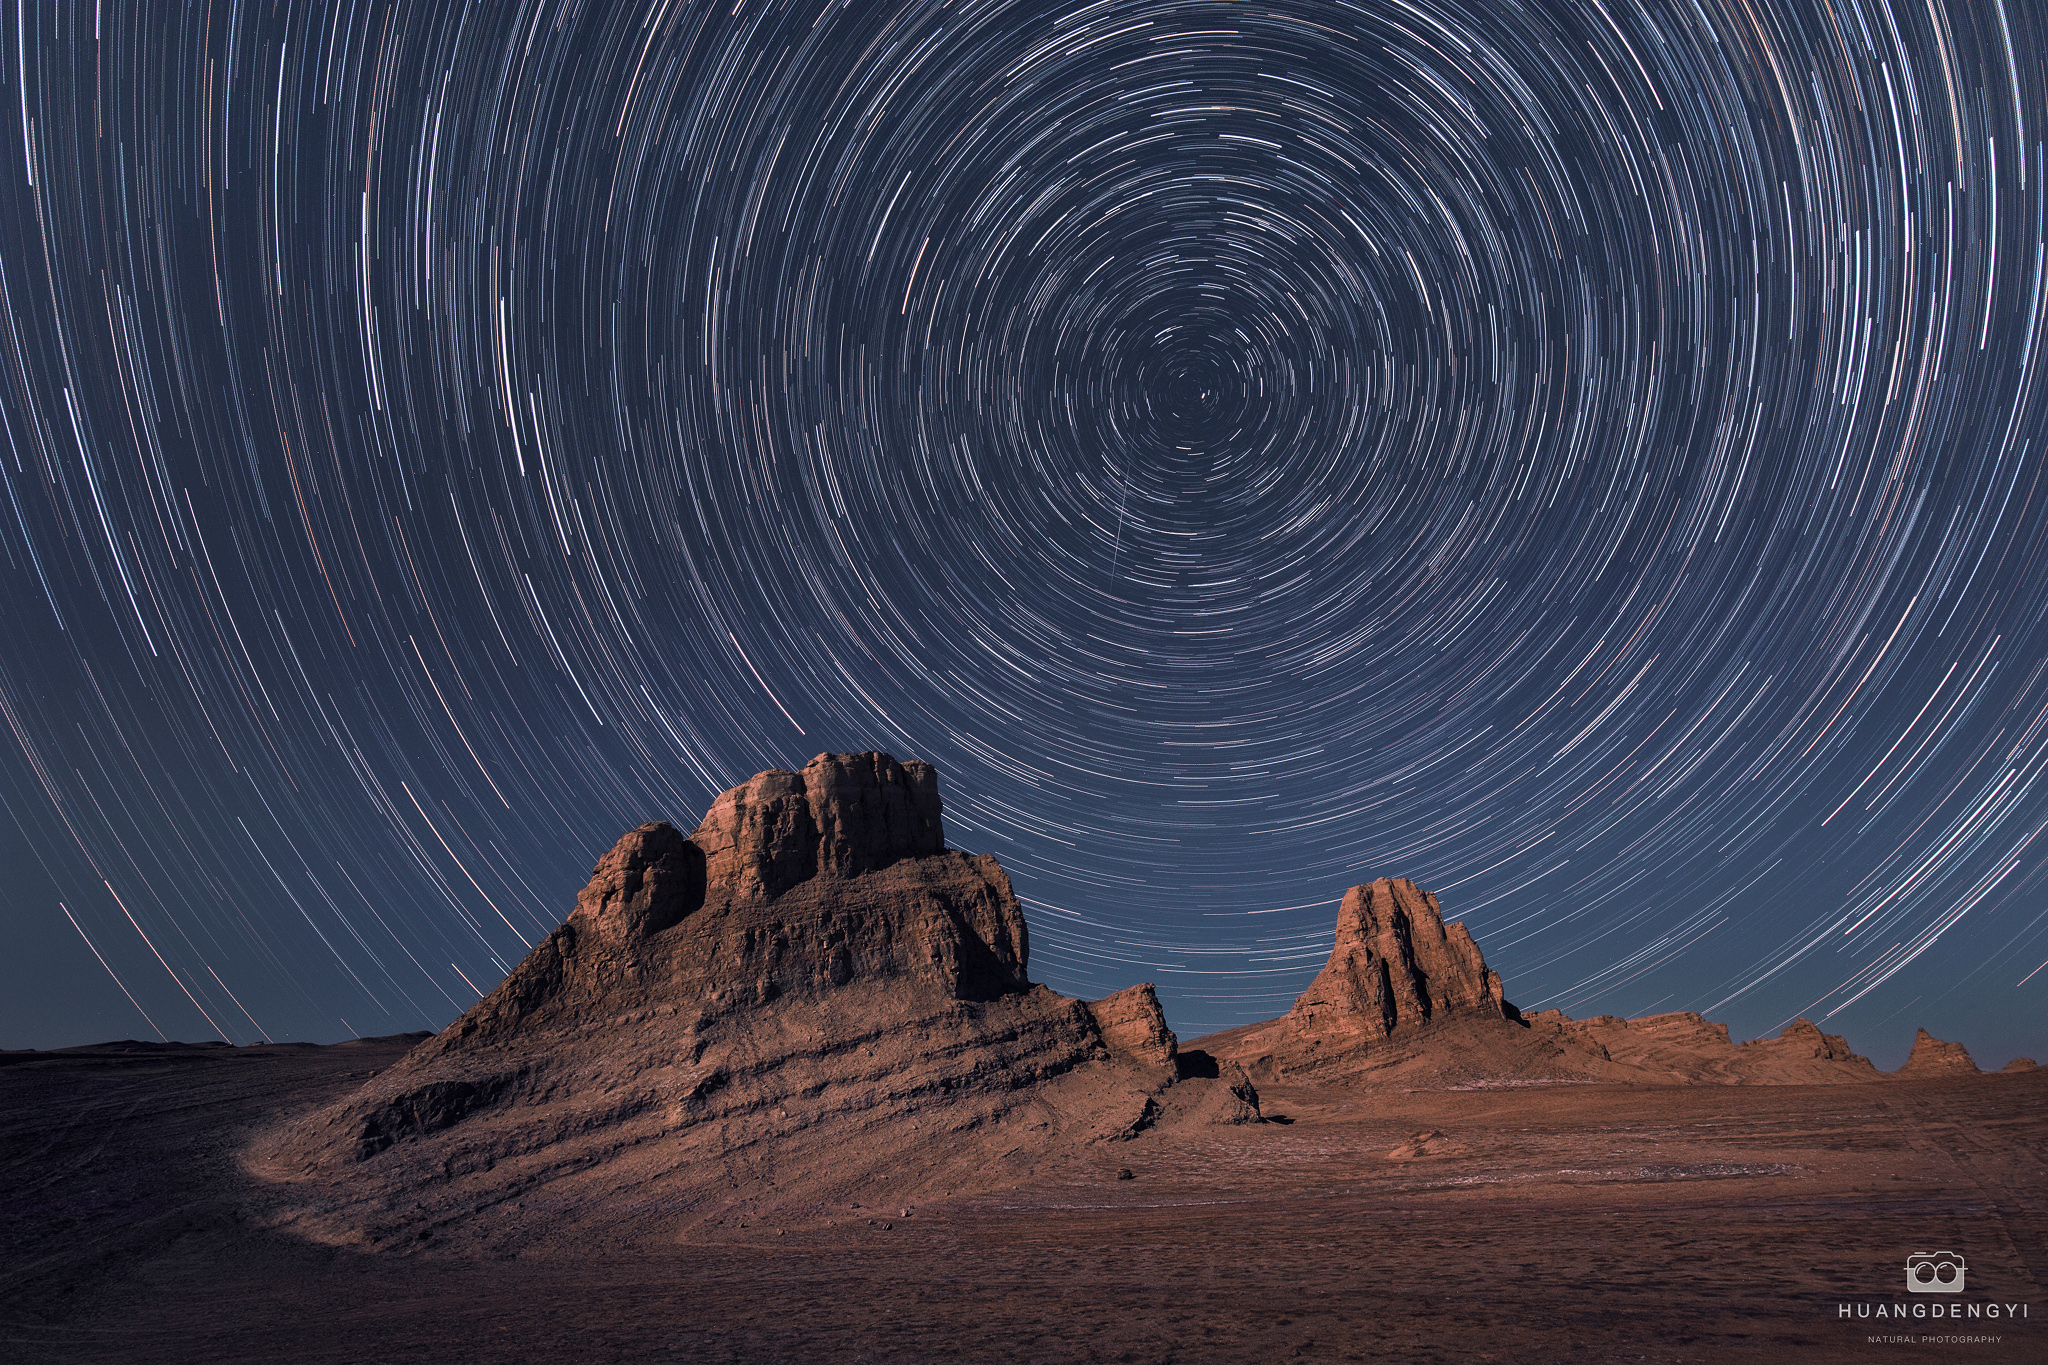 Star Trails for a Red Planet